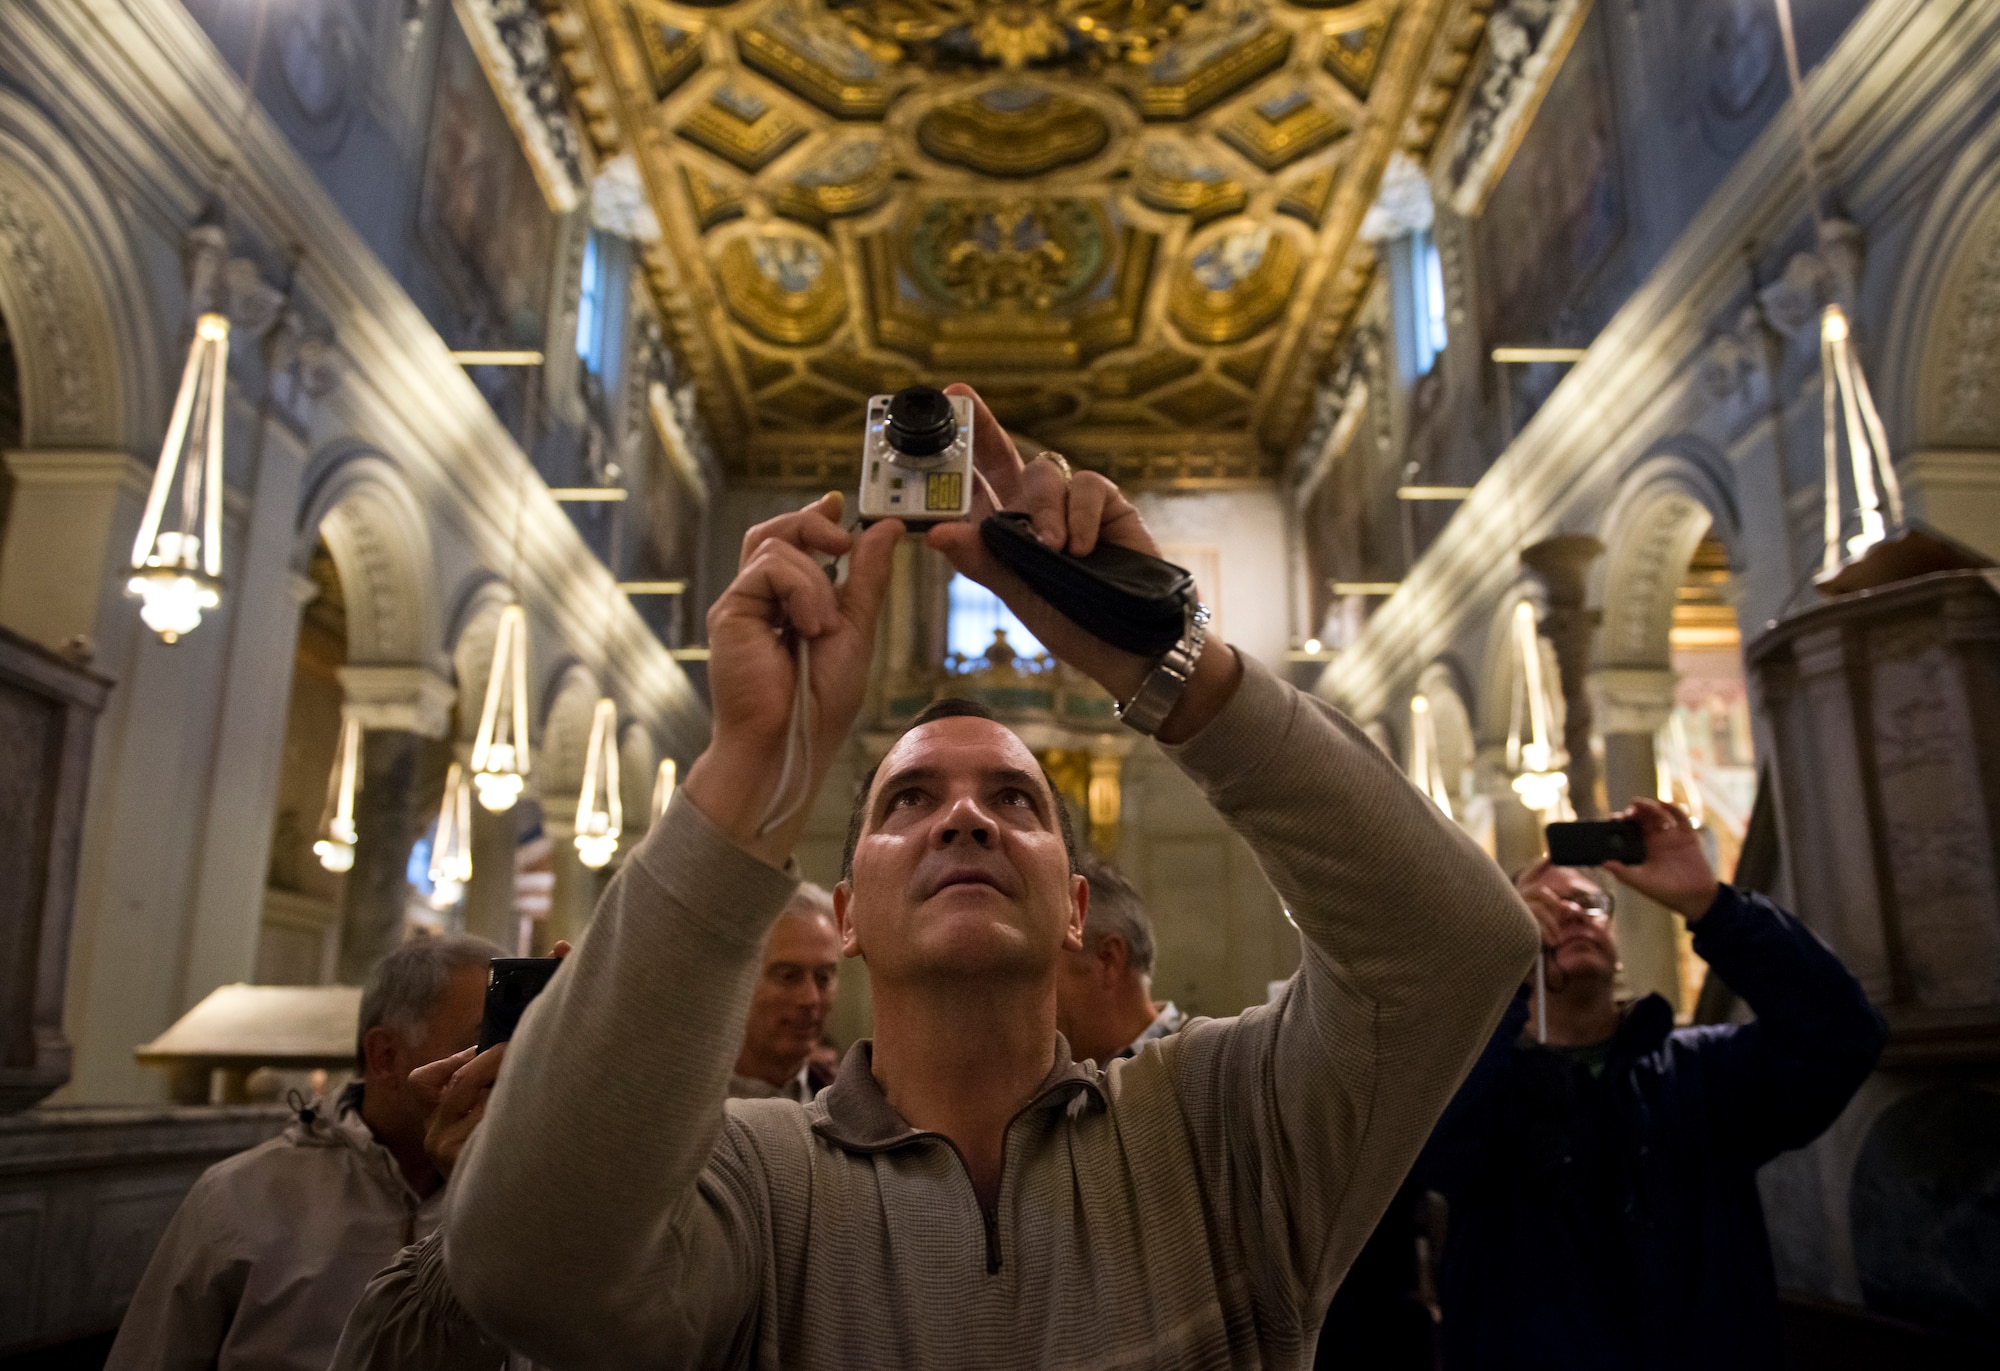 While touring the Basilica of San Clemente, retired Chaplain (Lt. Col.) Stephen Voyt takes a photo of the church's apse. The structure has three levels of history. The present basilica was built in 1100 and beneath is a fourth-century basilica. In the basement is a structure built in the first century. (U.S. Air Force photo/Staff Sgt. Andrew Lee)